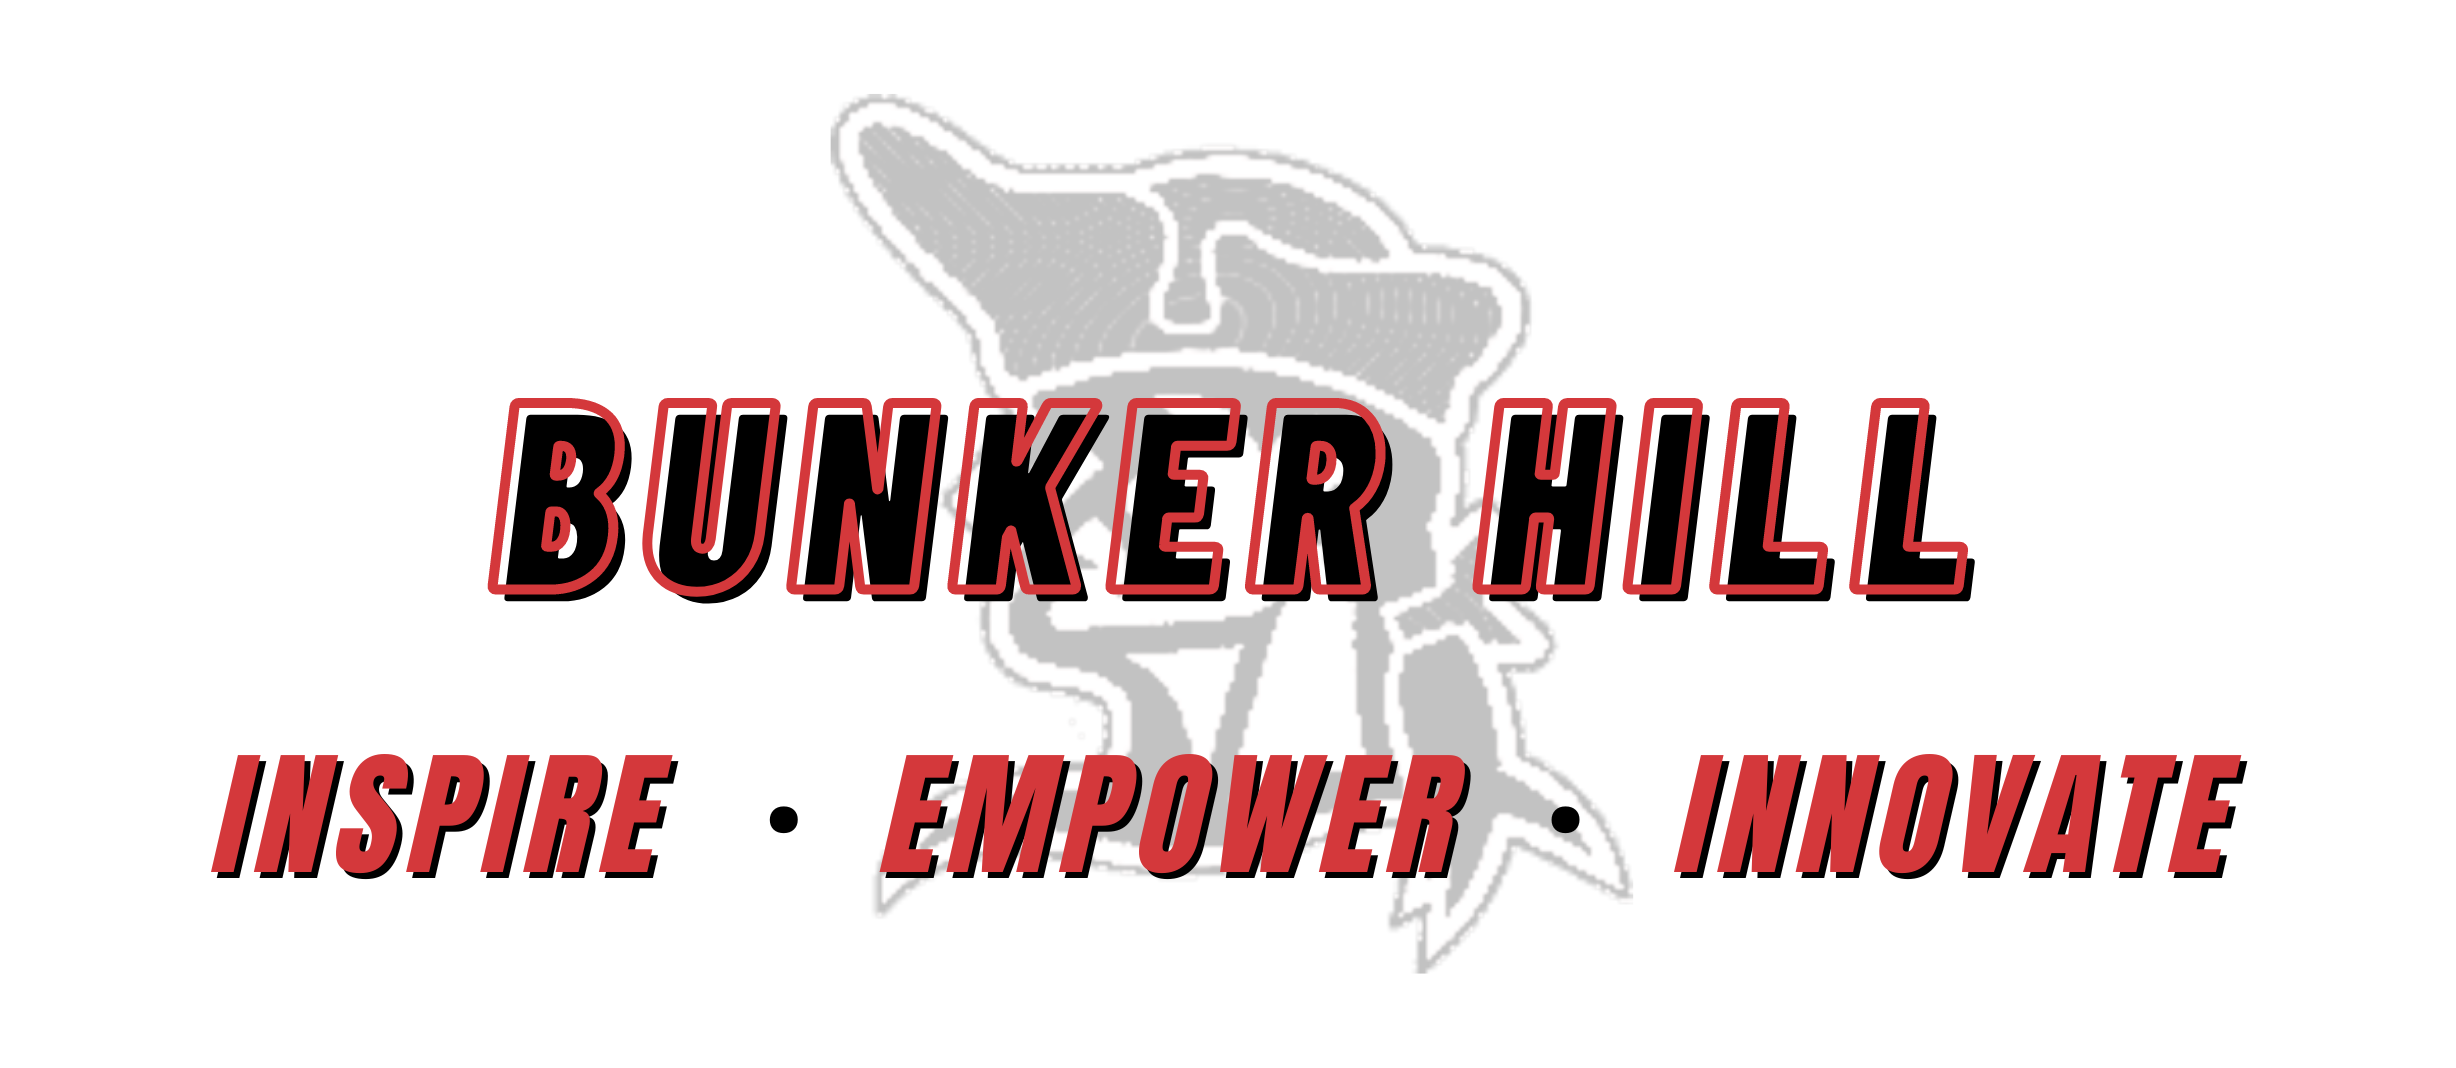 Black red and white bunker hill logo